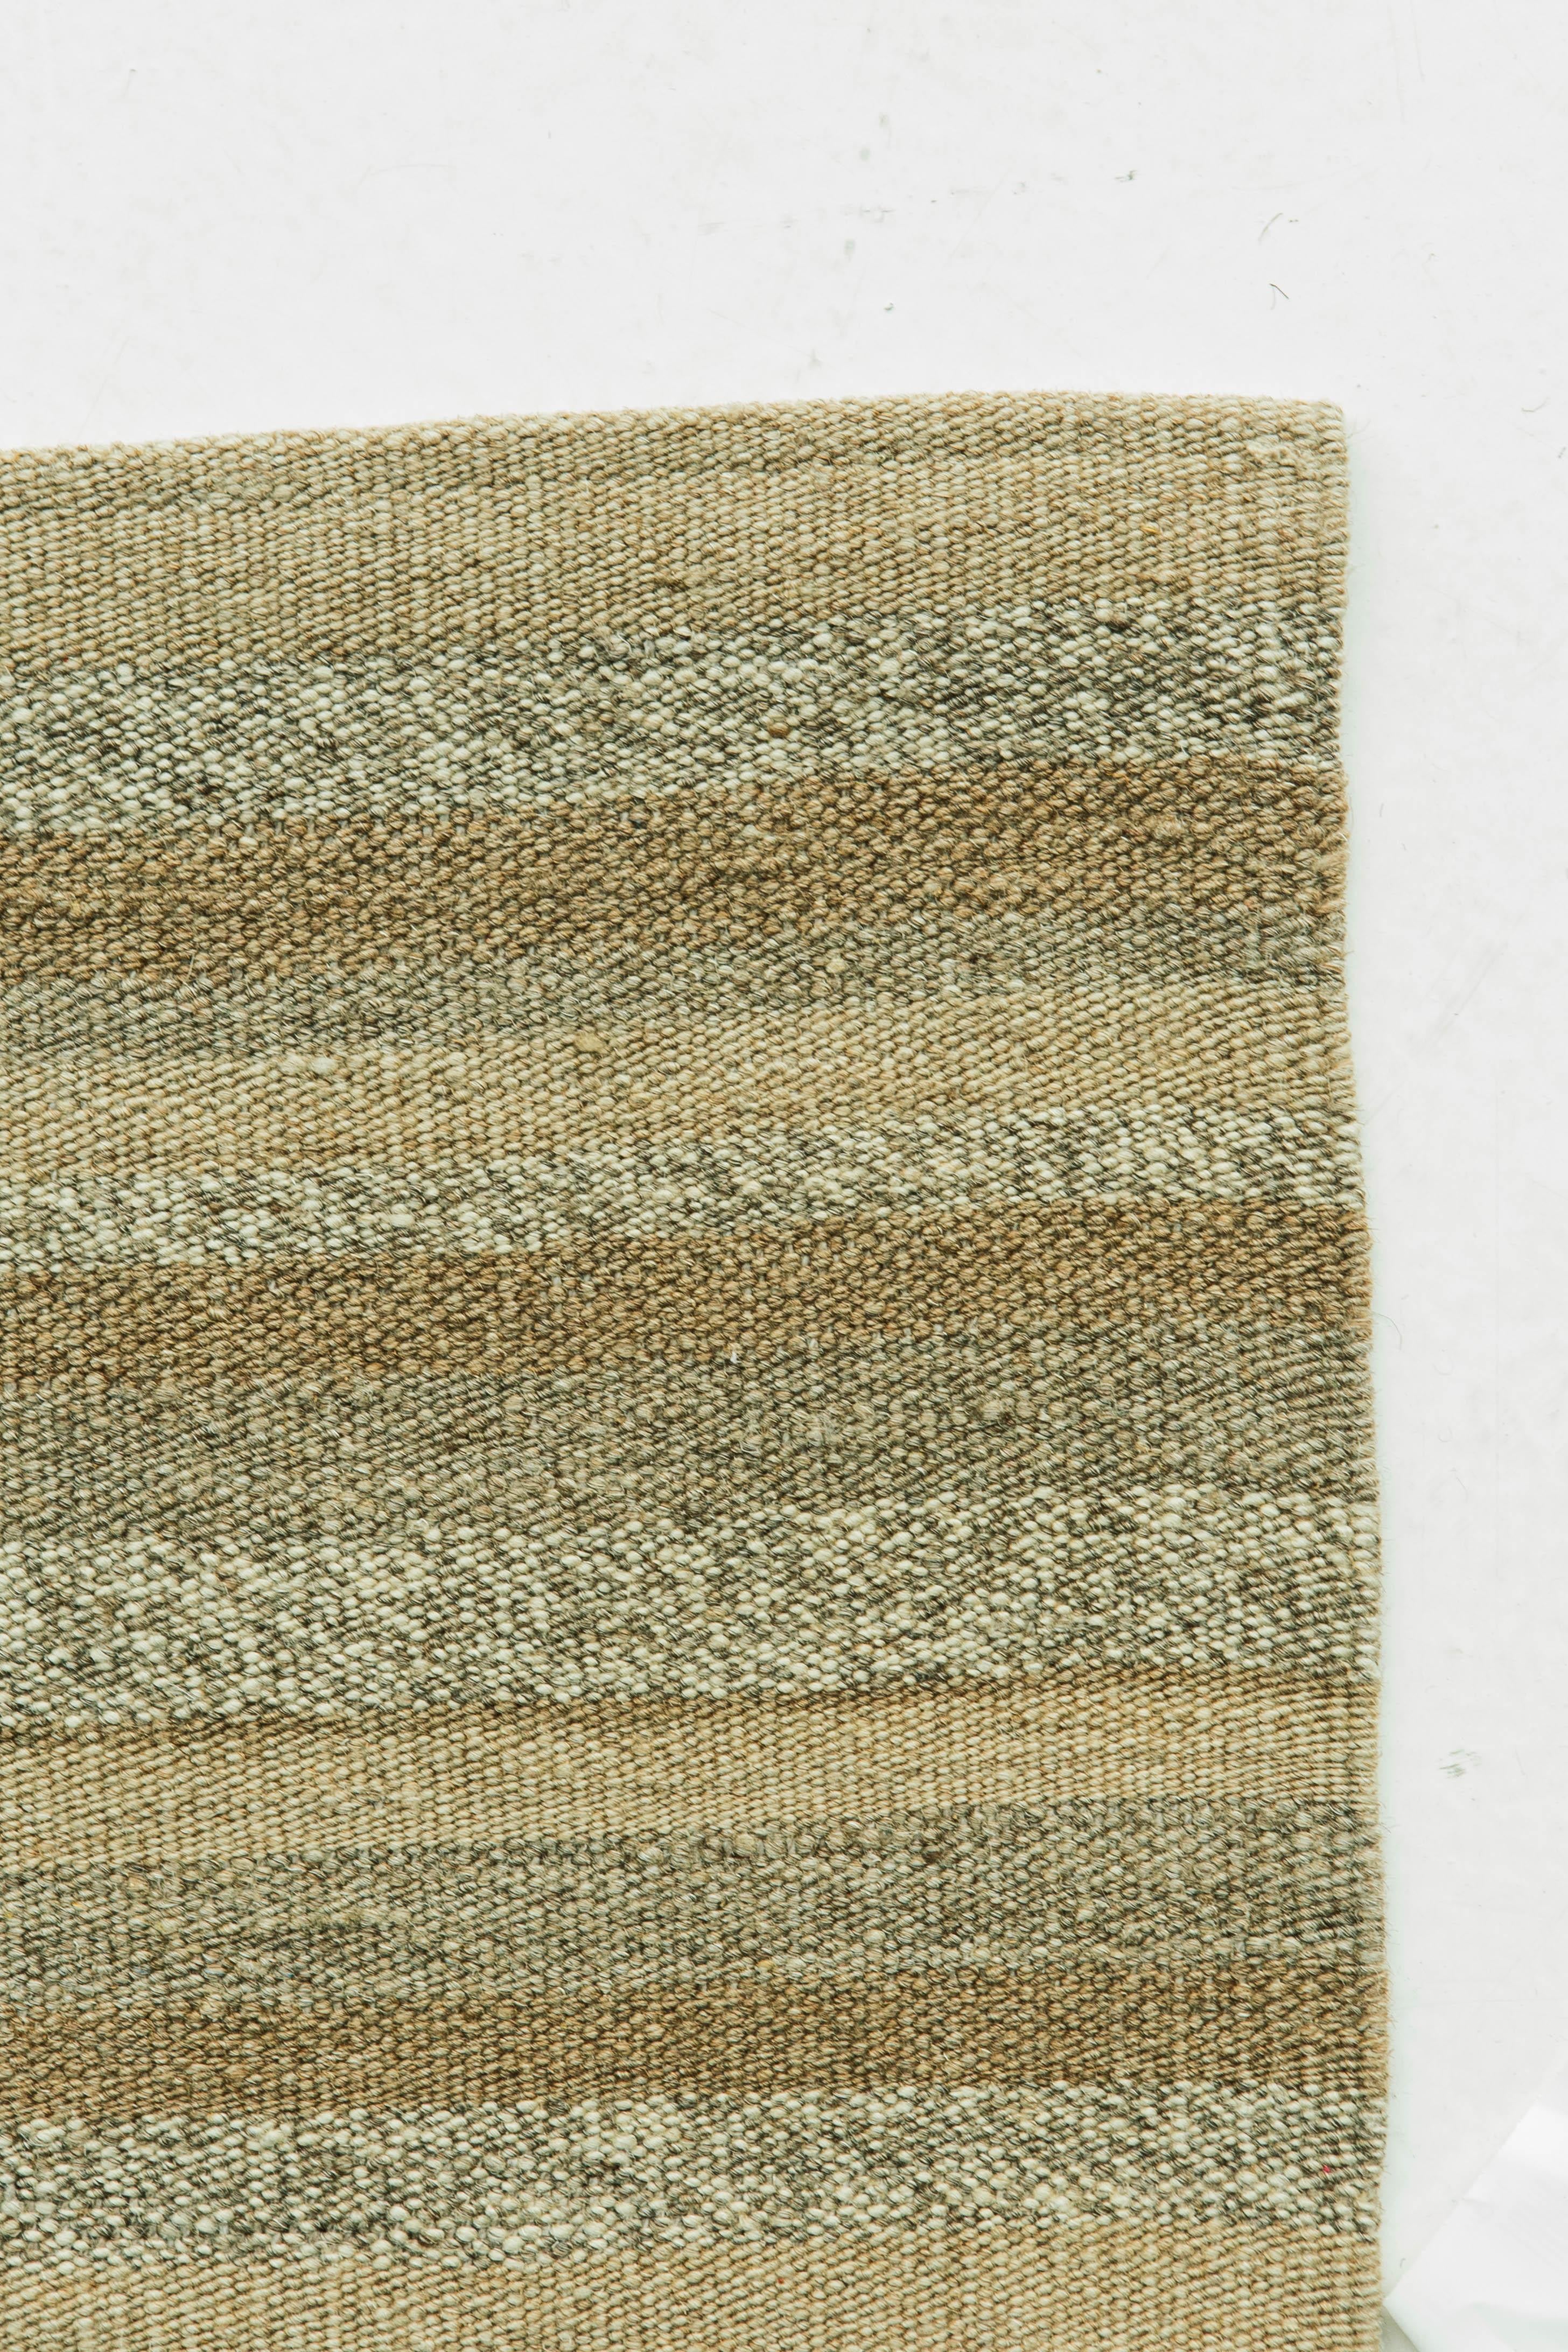 A natural dye flat-weave Kilim in a neutral stripe pattern. This flat-weave is made up of natural wool that create an interesting texture and vibe. A simple yet interesting rug that will elevate any design space.


Rug number 24719
Size 7' 9